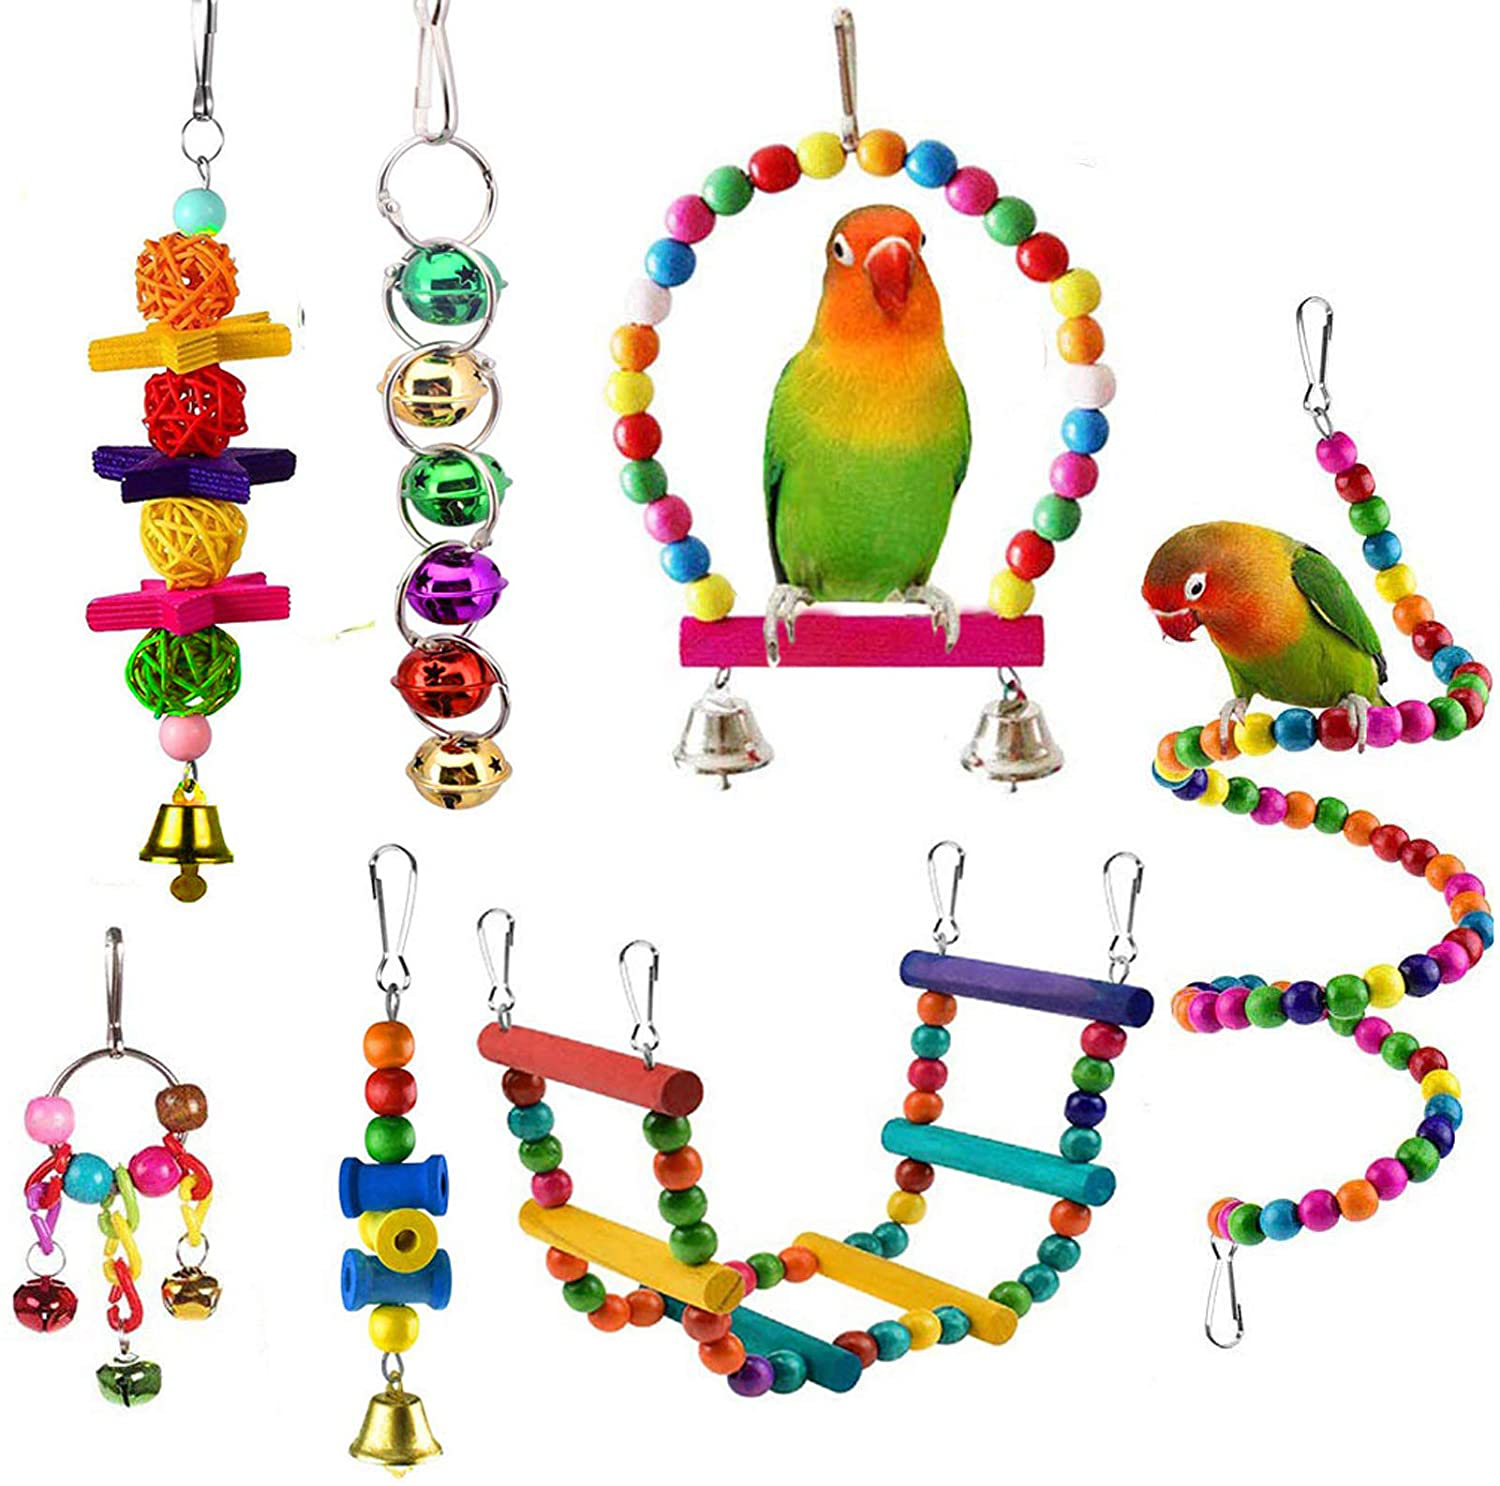 ESRISE 7 Pcs Bird Parakeet Cockatiel Parrot Toys, Hanging Bell Pet Bird Cage Hammock Swing Climbing Ladders Toy Wooden Perch Chewing Toy for Small Parrots, Conures, Love Birds, Finche Animals & Pet Supplies > Pet Supplies > Bird Supplies > Bird Ladders & Perches ESRISE   